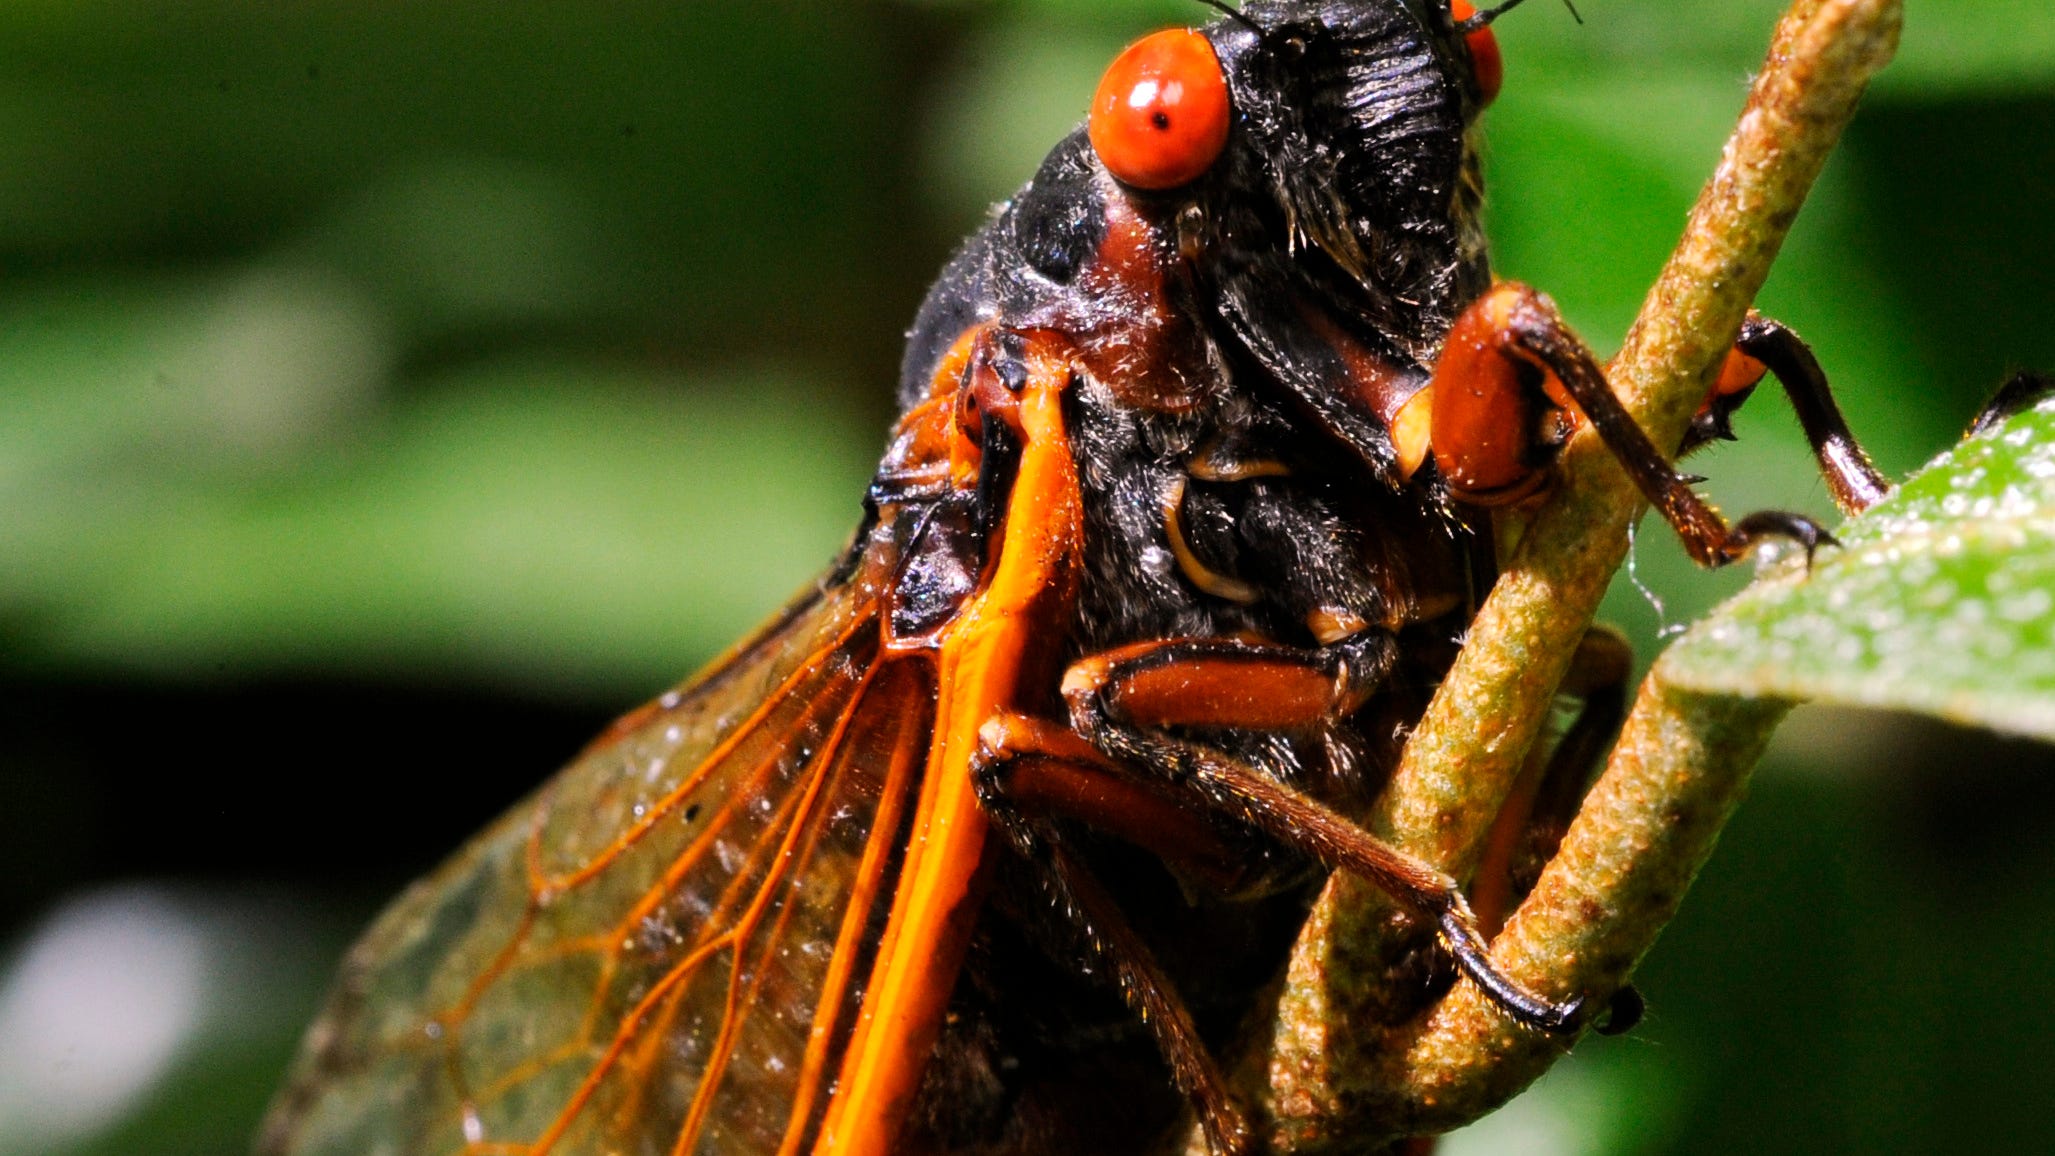 Periodical cicadas to reemerge in Michigan for first time in 17 years